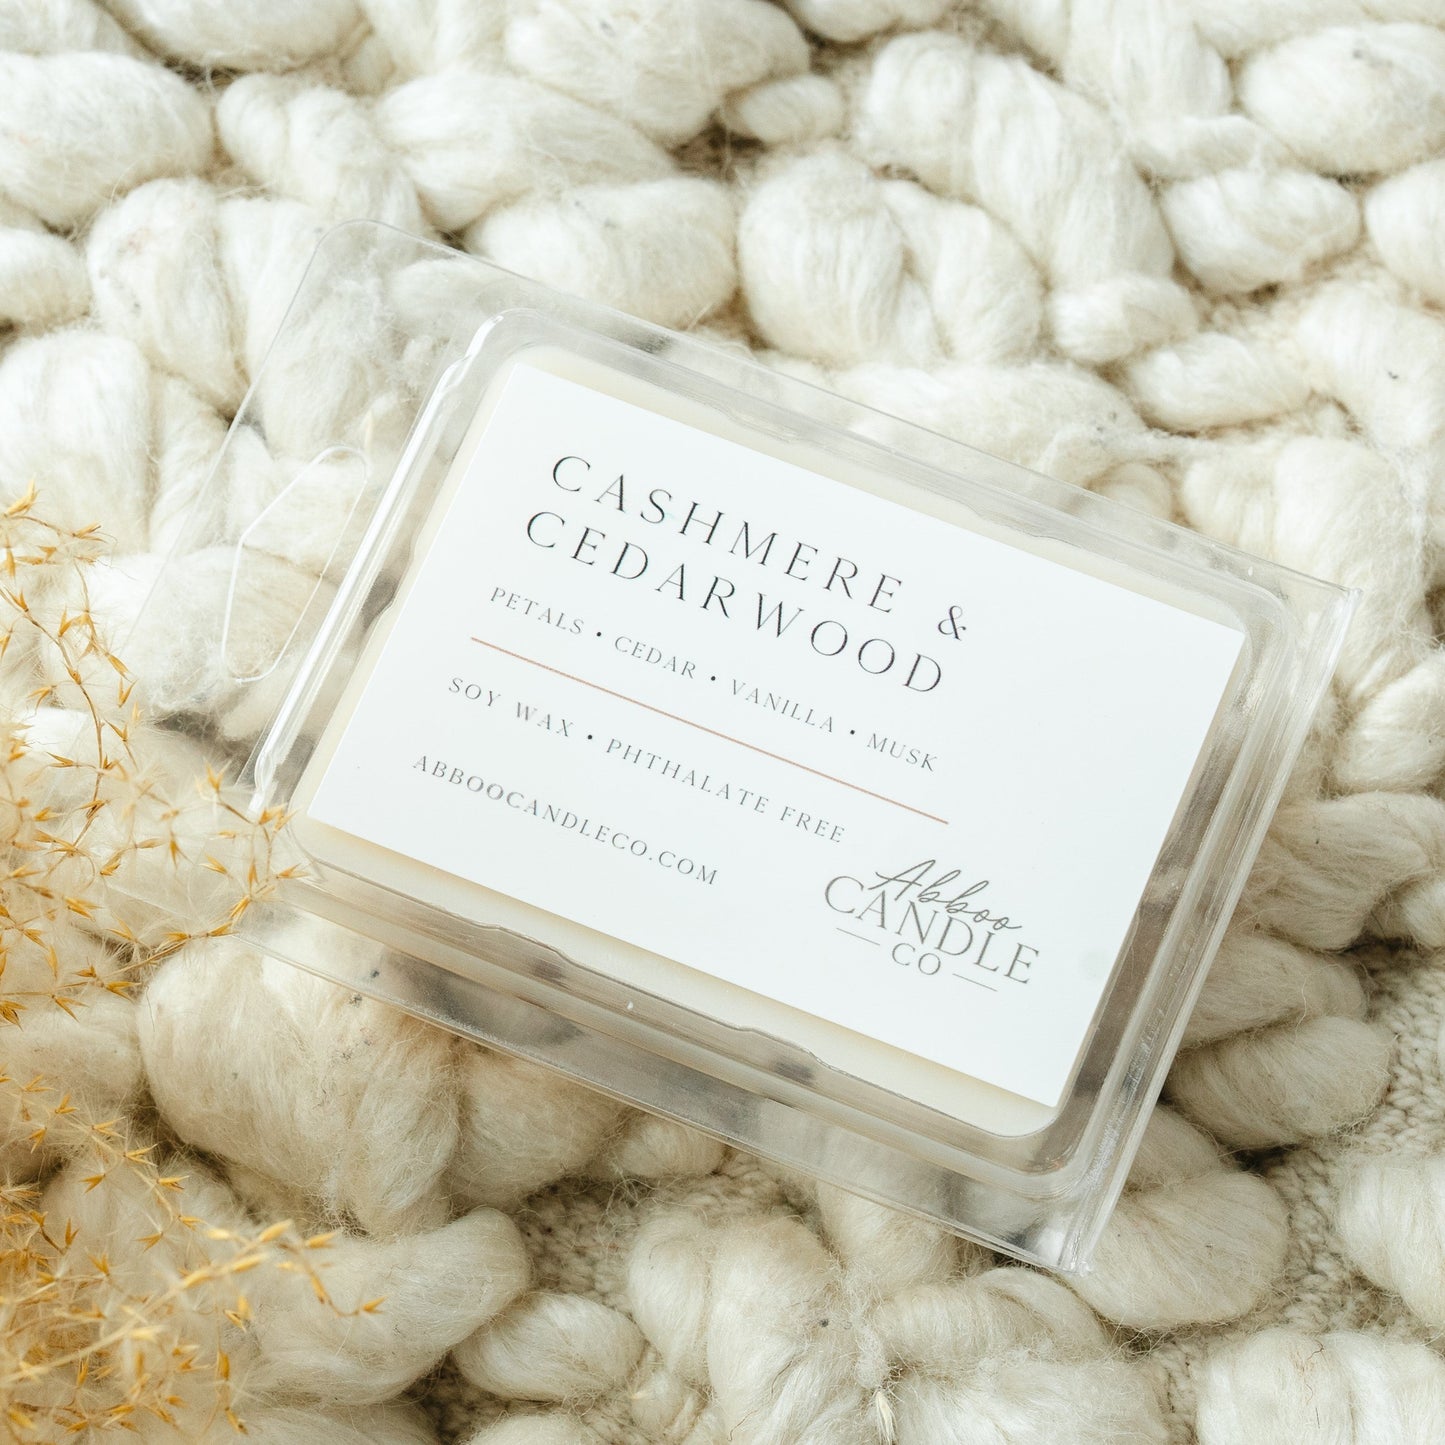 Cashmere and Cedarwood Soy Wax Melts - Abboo Candle Co® Wholesale